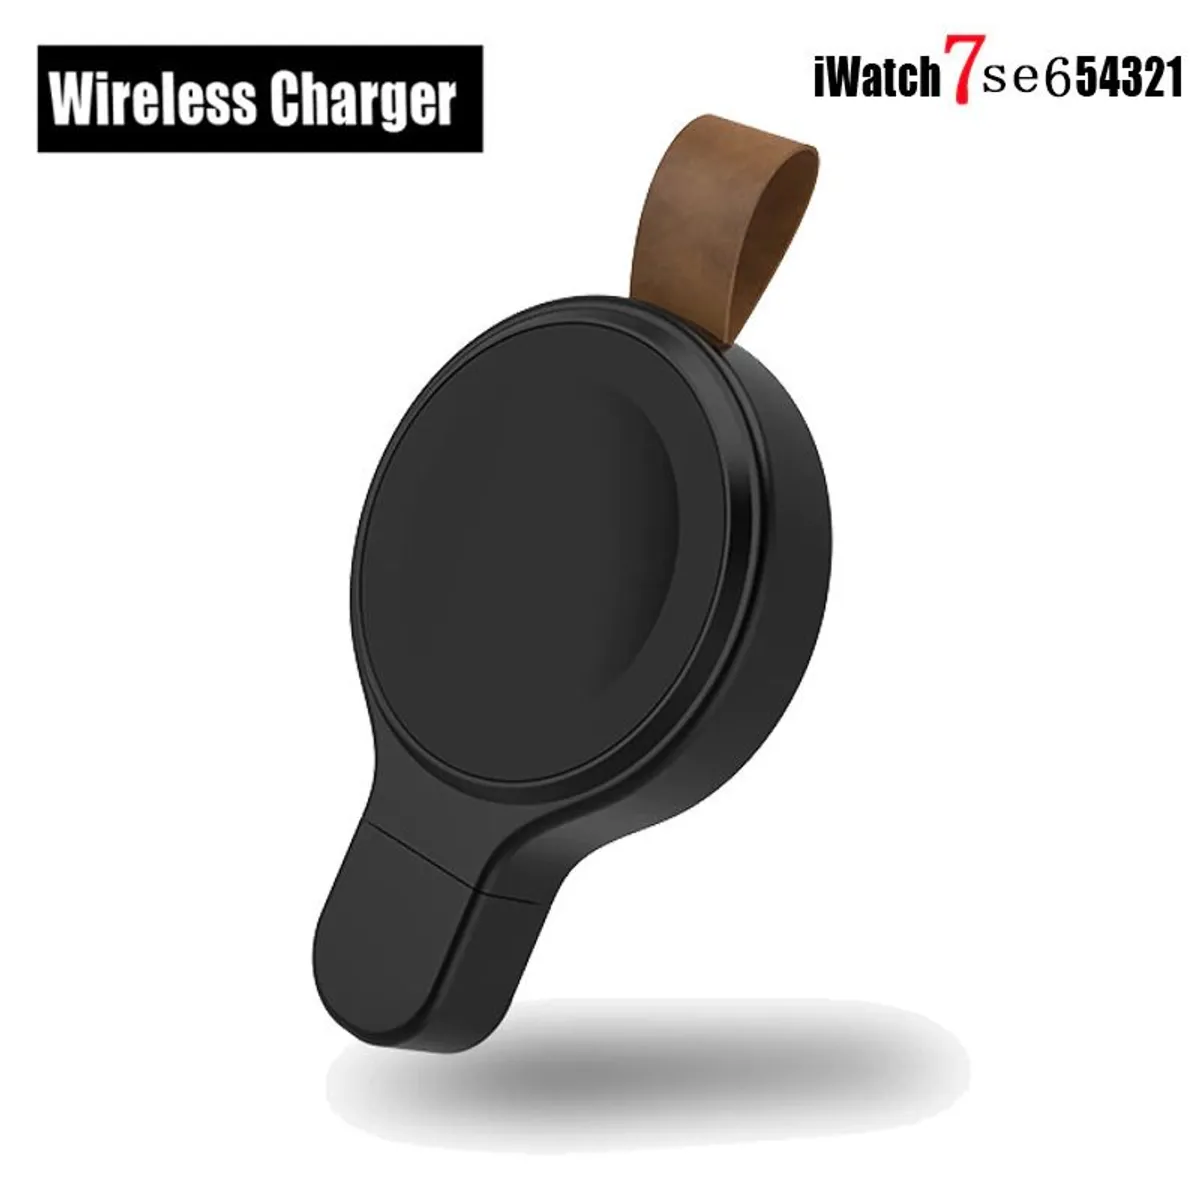 Wireless Charger for Apple Watch 7 6 5 4 3 se Series iWatch Accessories Portable Type c Charging Dock Station Apple watch Charger